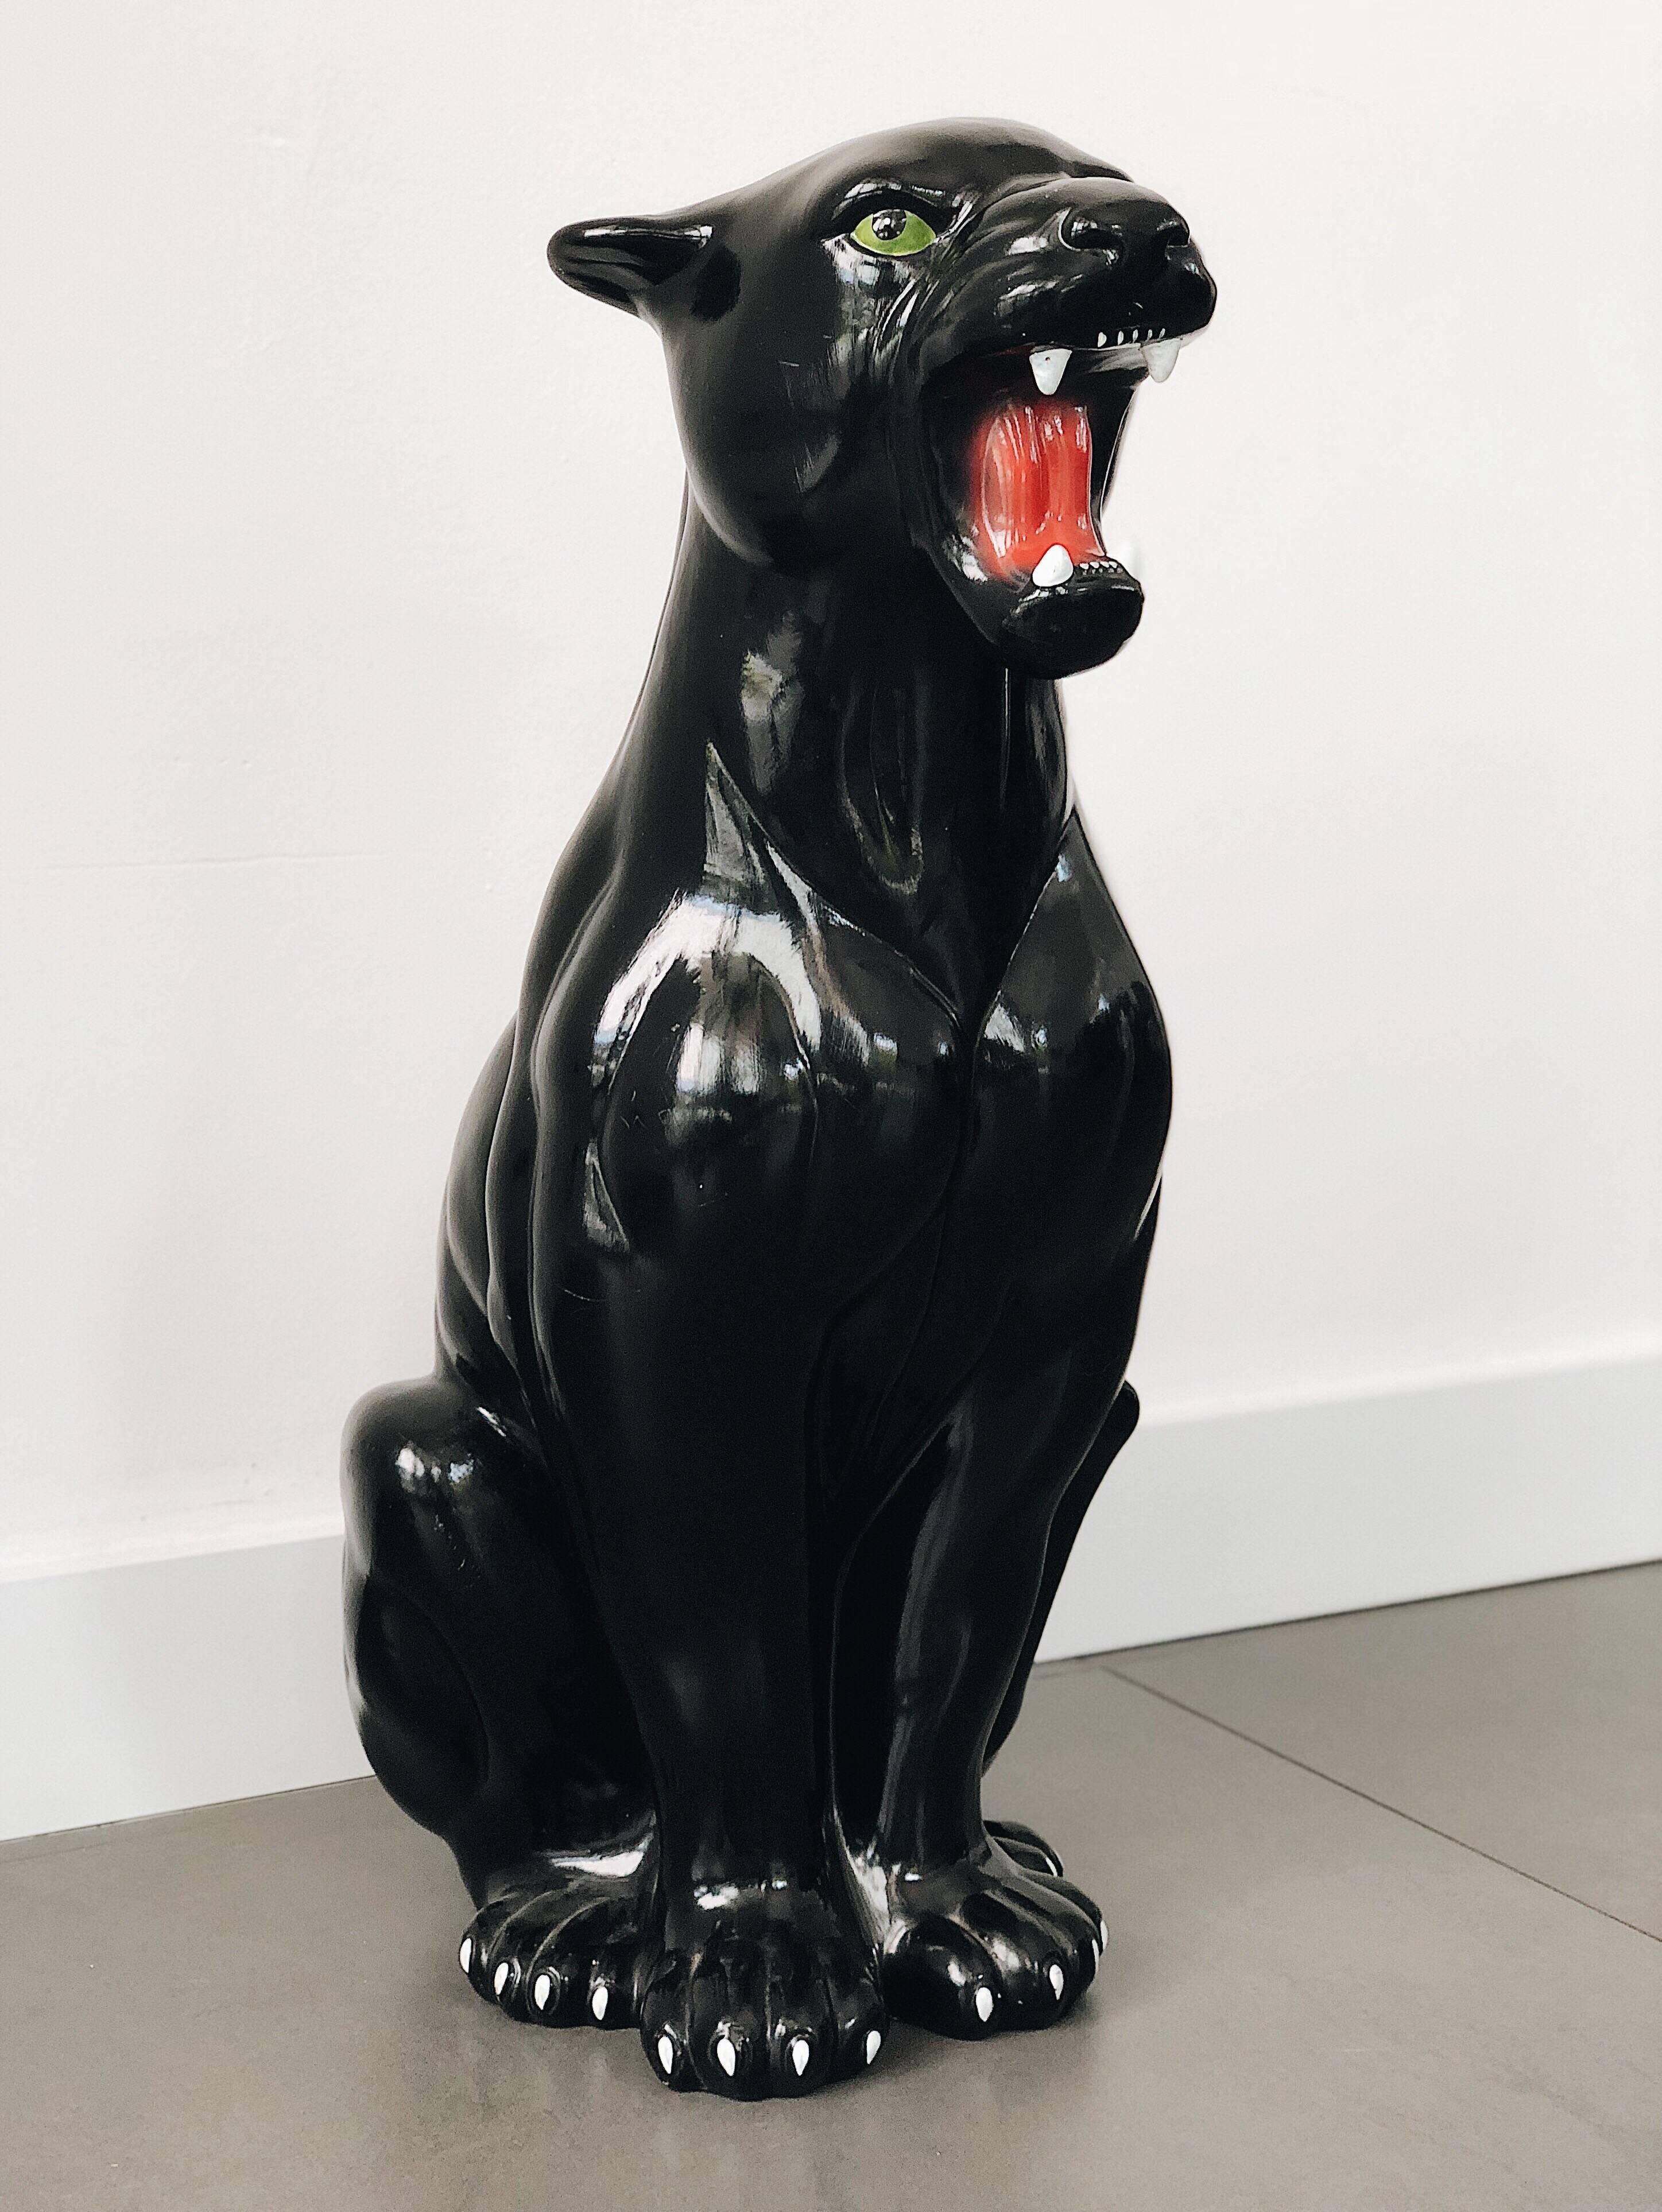 Italian ceramic, perfect condition, produced in 1960s. We have also small and medium black panthers, check our products.